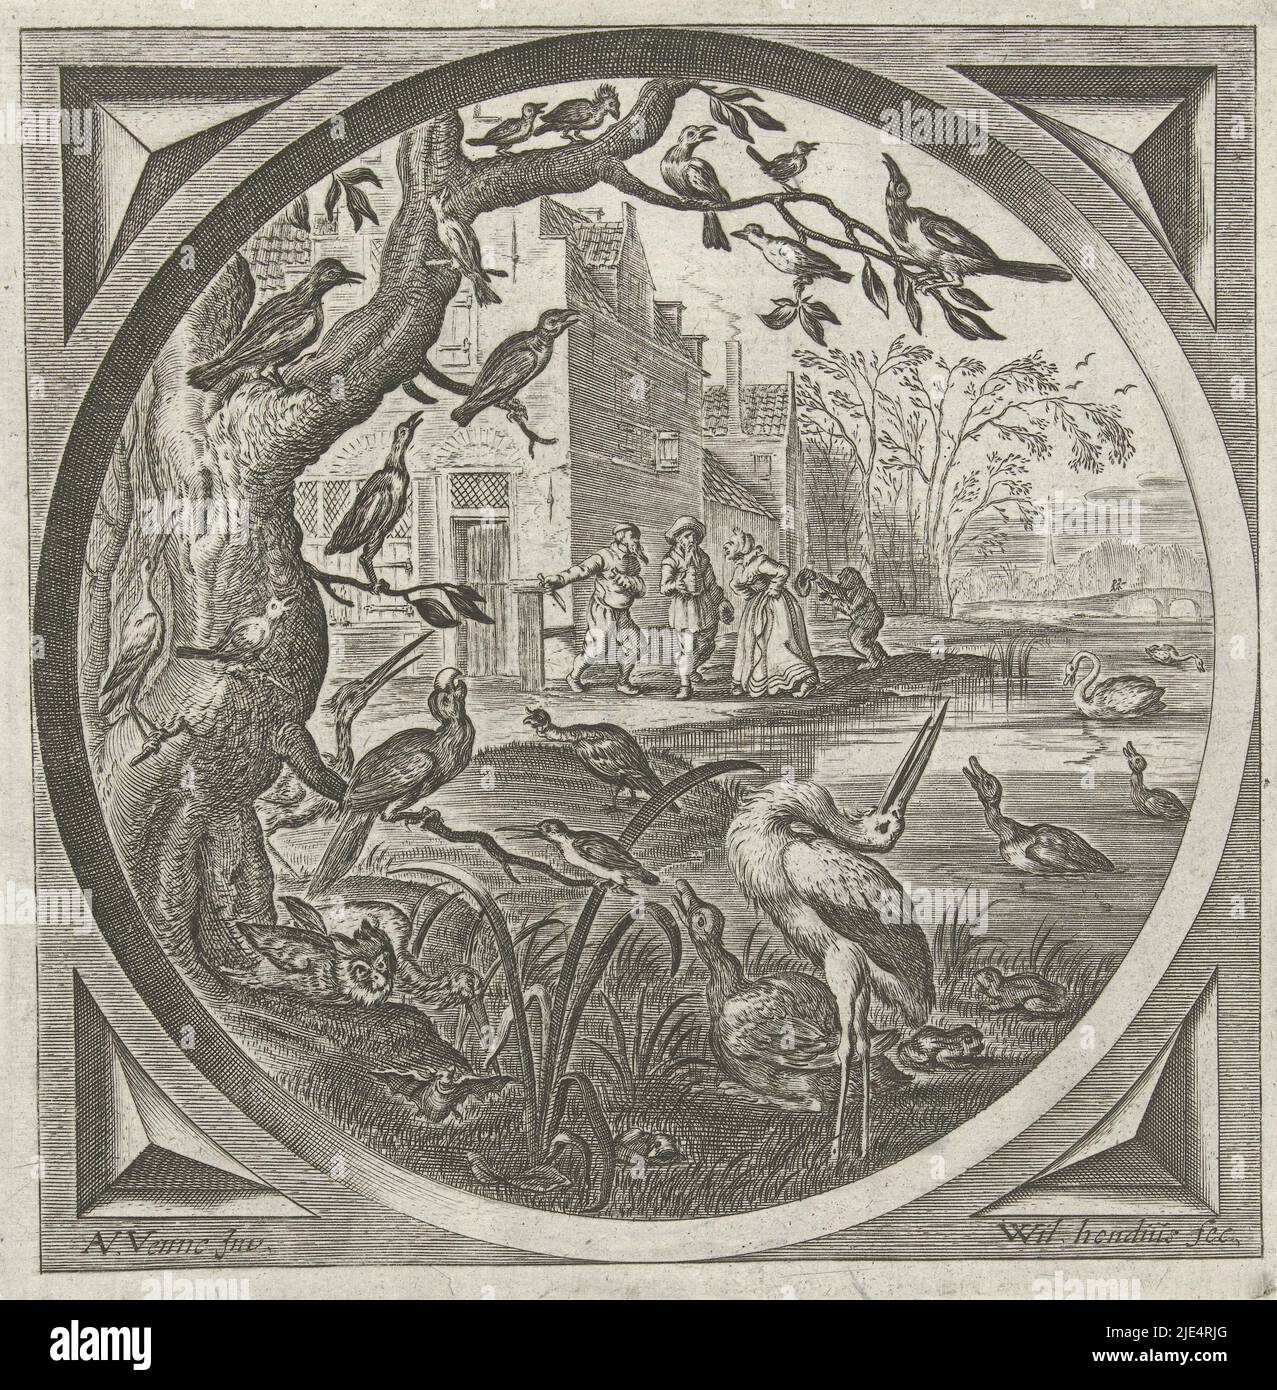 Many different birds near a lake with conversational figures in the background in front of a house, Landscape with birds, print maker: Willem Hondius, (mentioned on object), Adriaen Pietersz. van de Venne, (mentioned on object), The Hague, 1608 - 1658, paper, etching, h 140 mm × w 138 mm Stock Photo